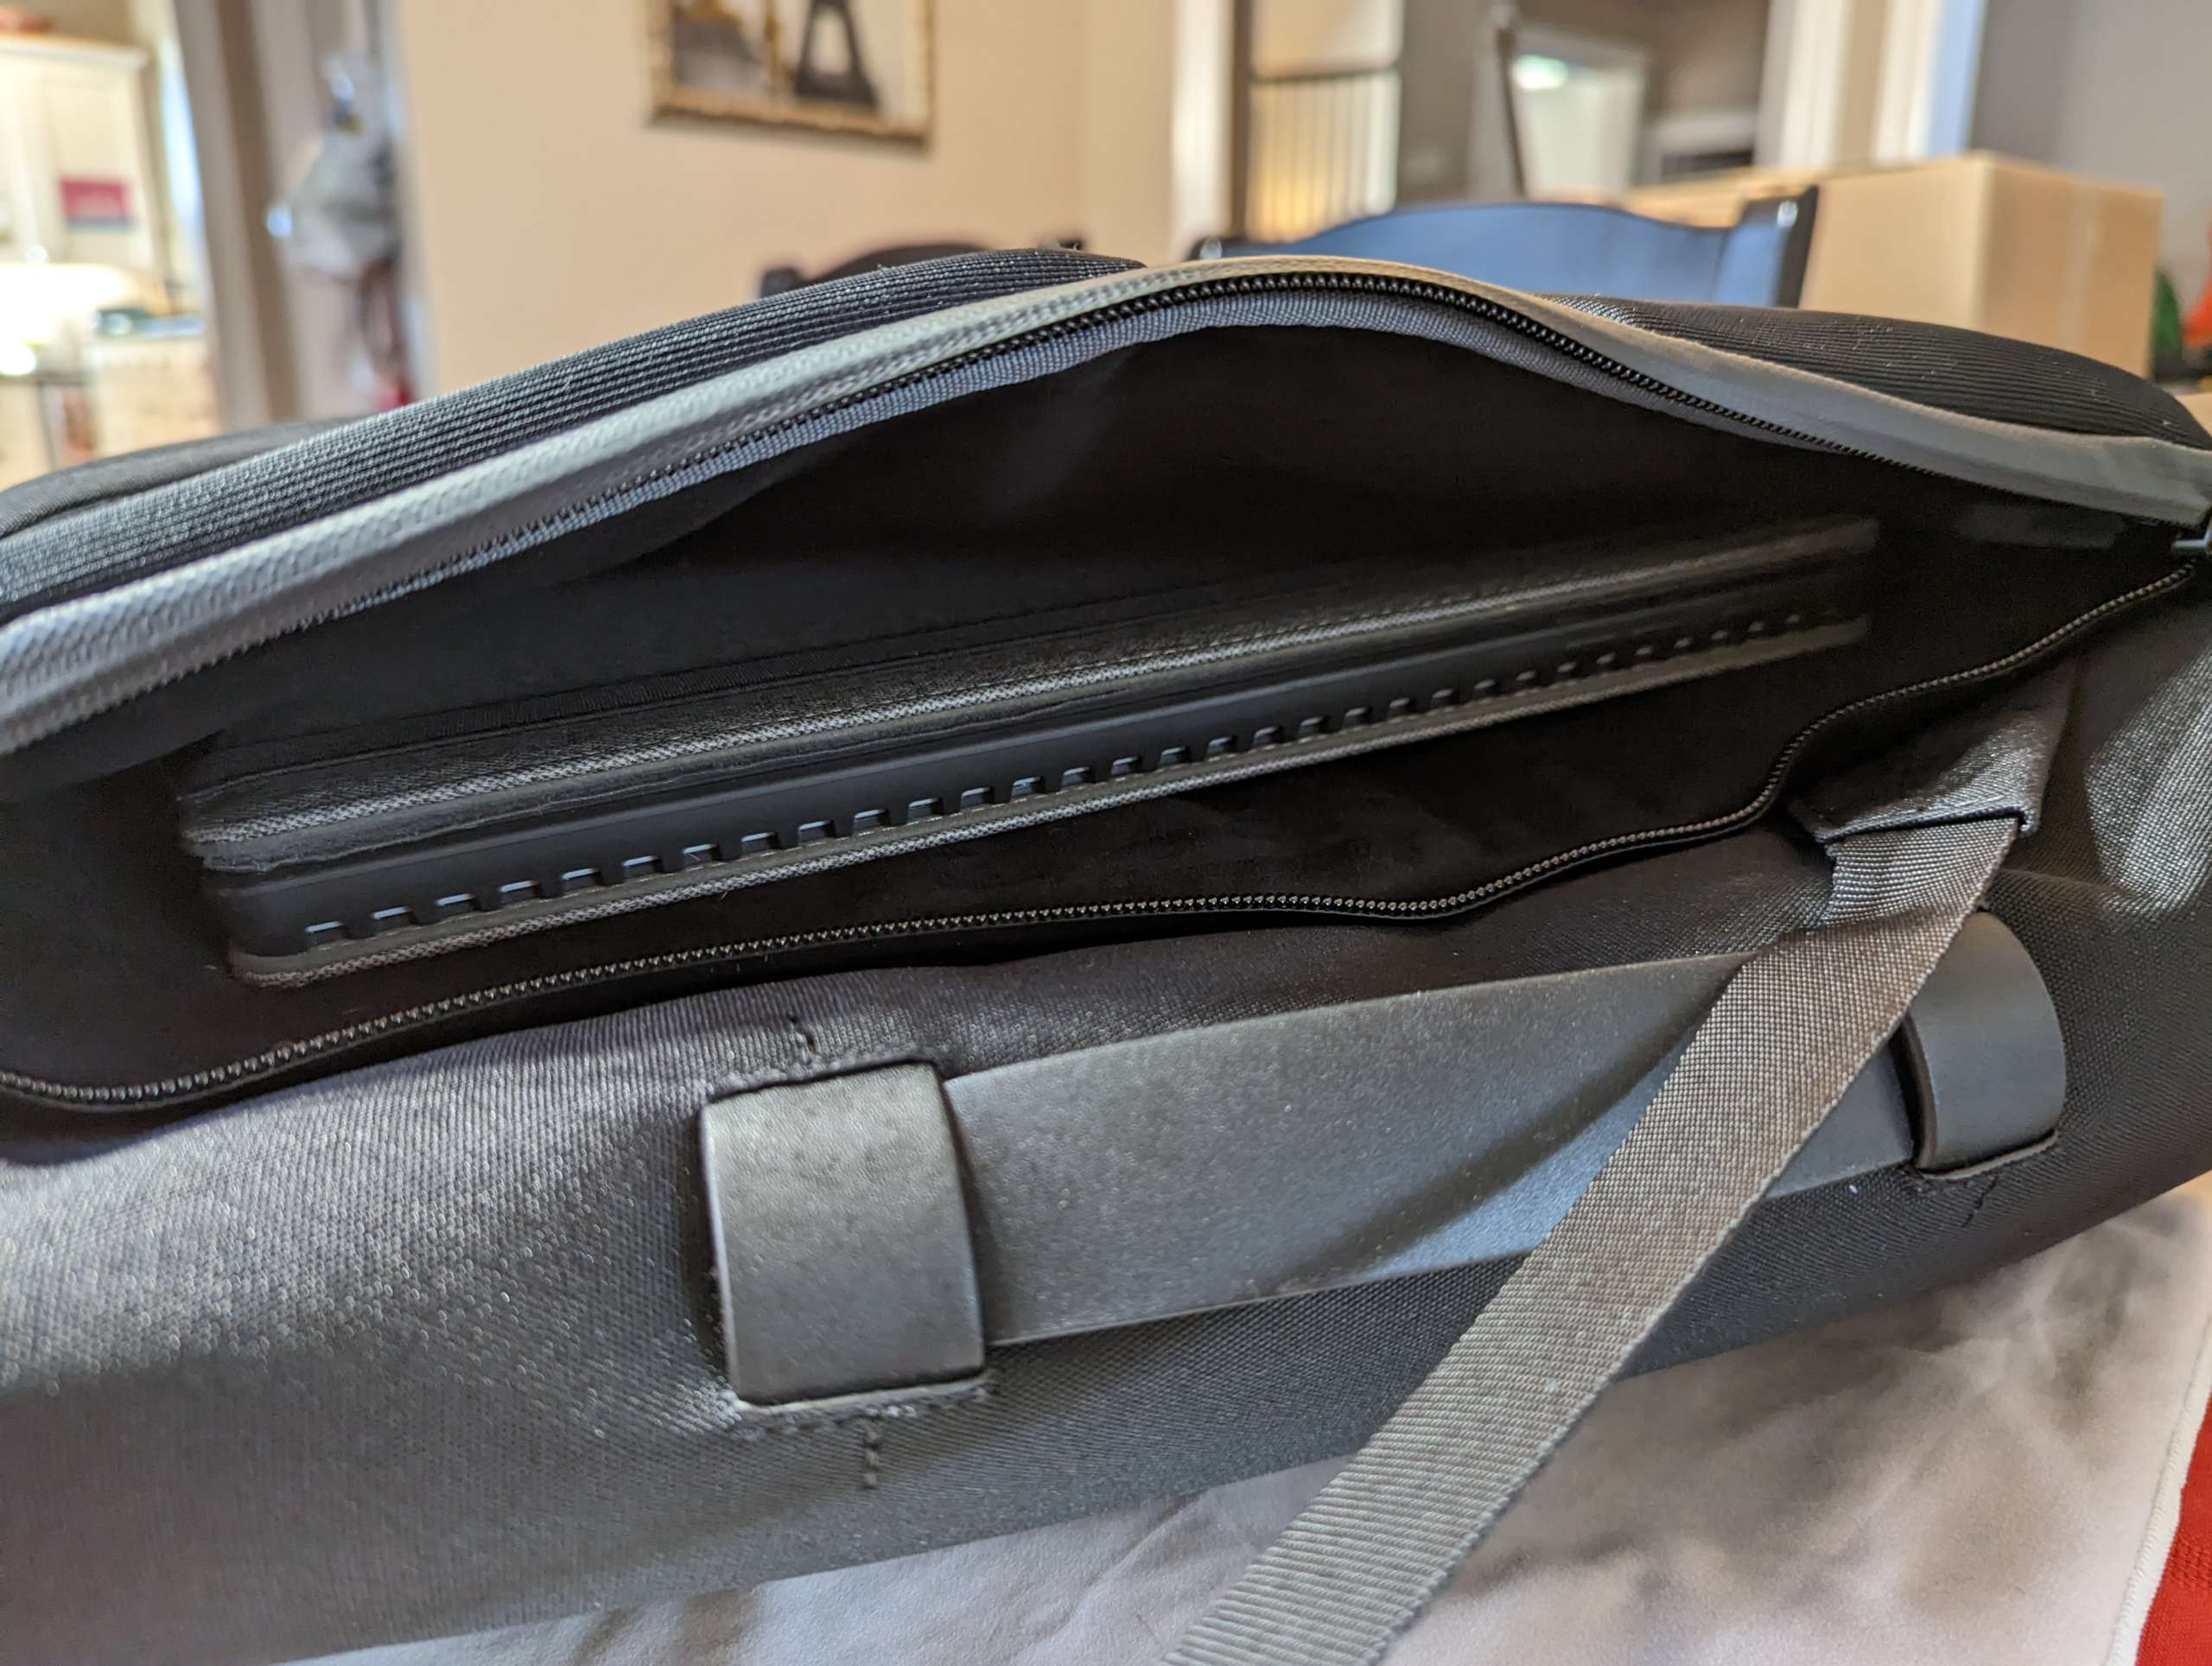 Troubadour Goods Aero Backpack review - form meets function - The Gadgeteer